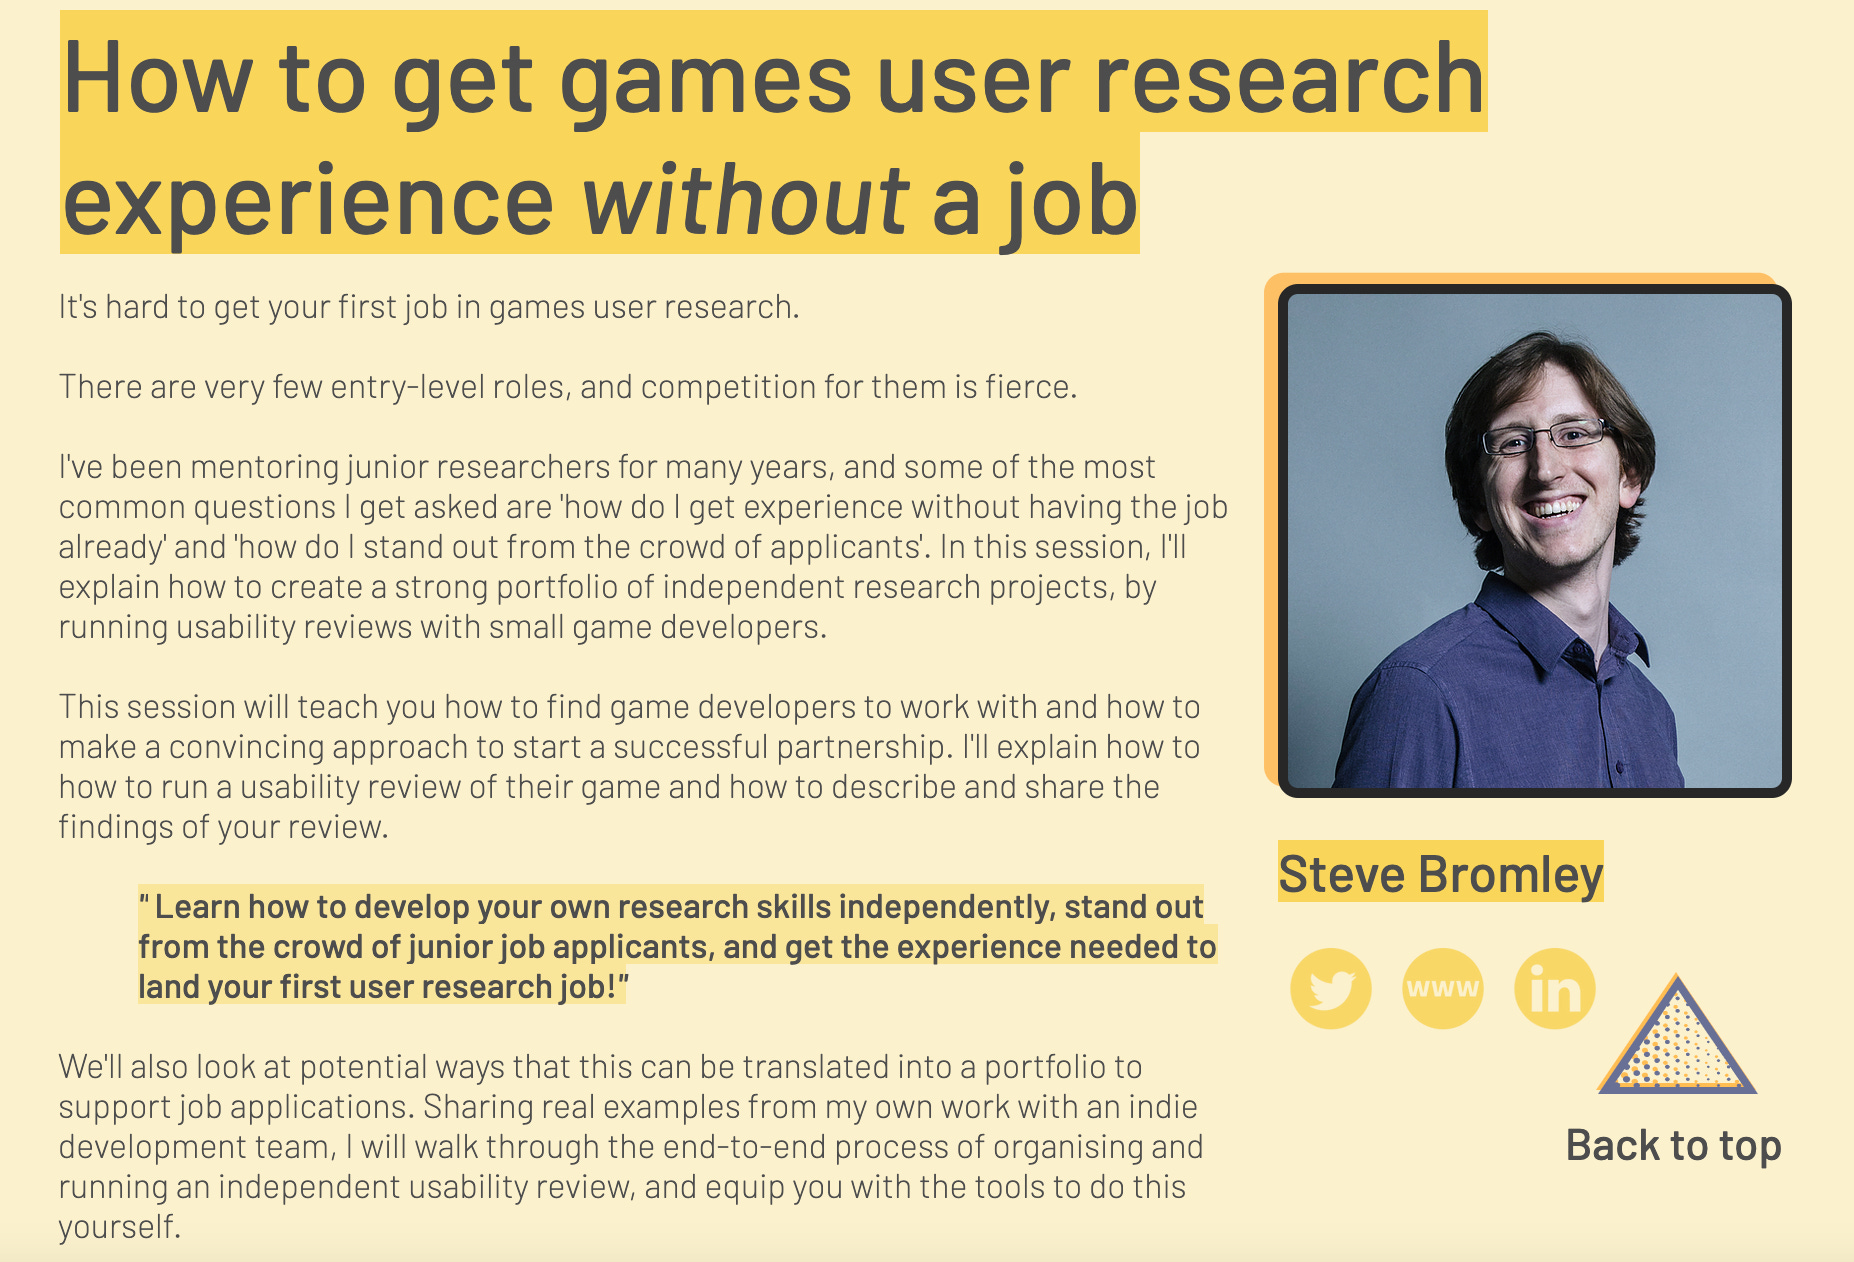 Find the fun - measuring enjoyment in games user research [How to be a games  user researcher] 👾 🔍